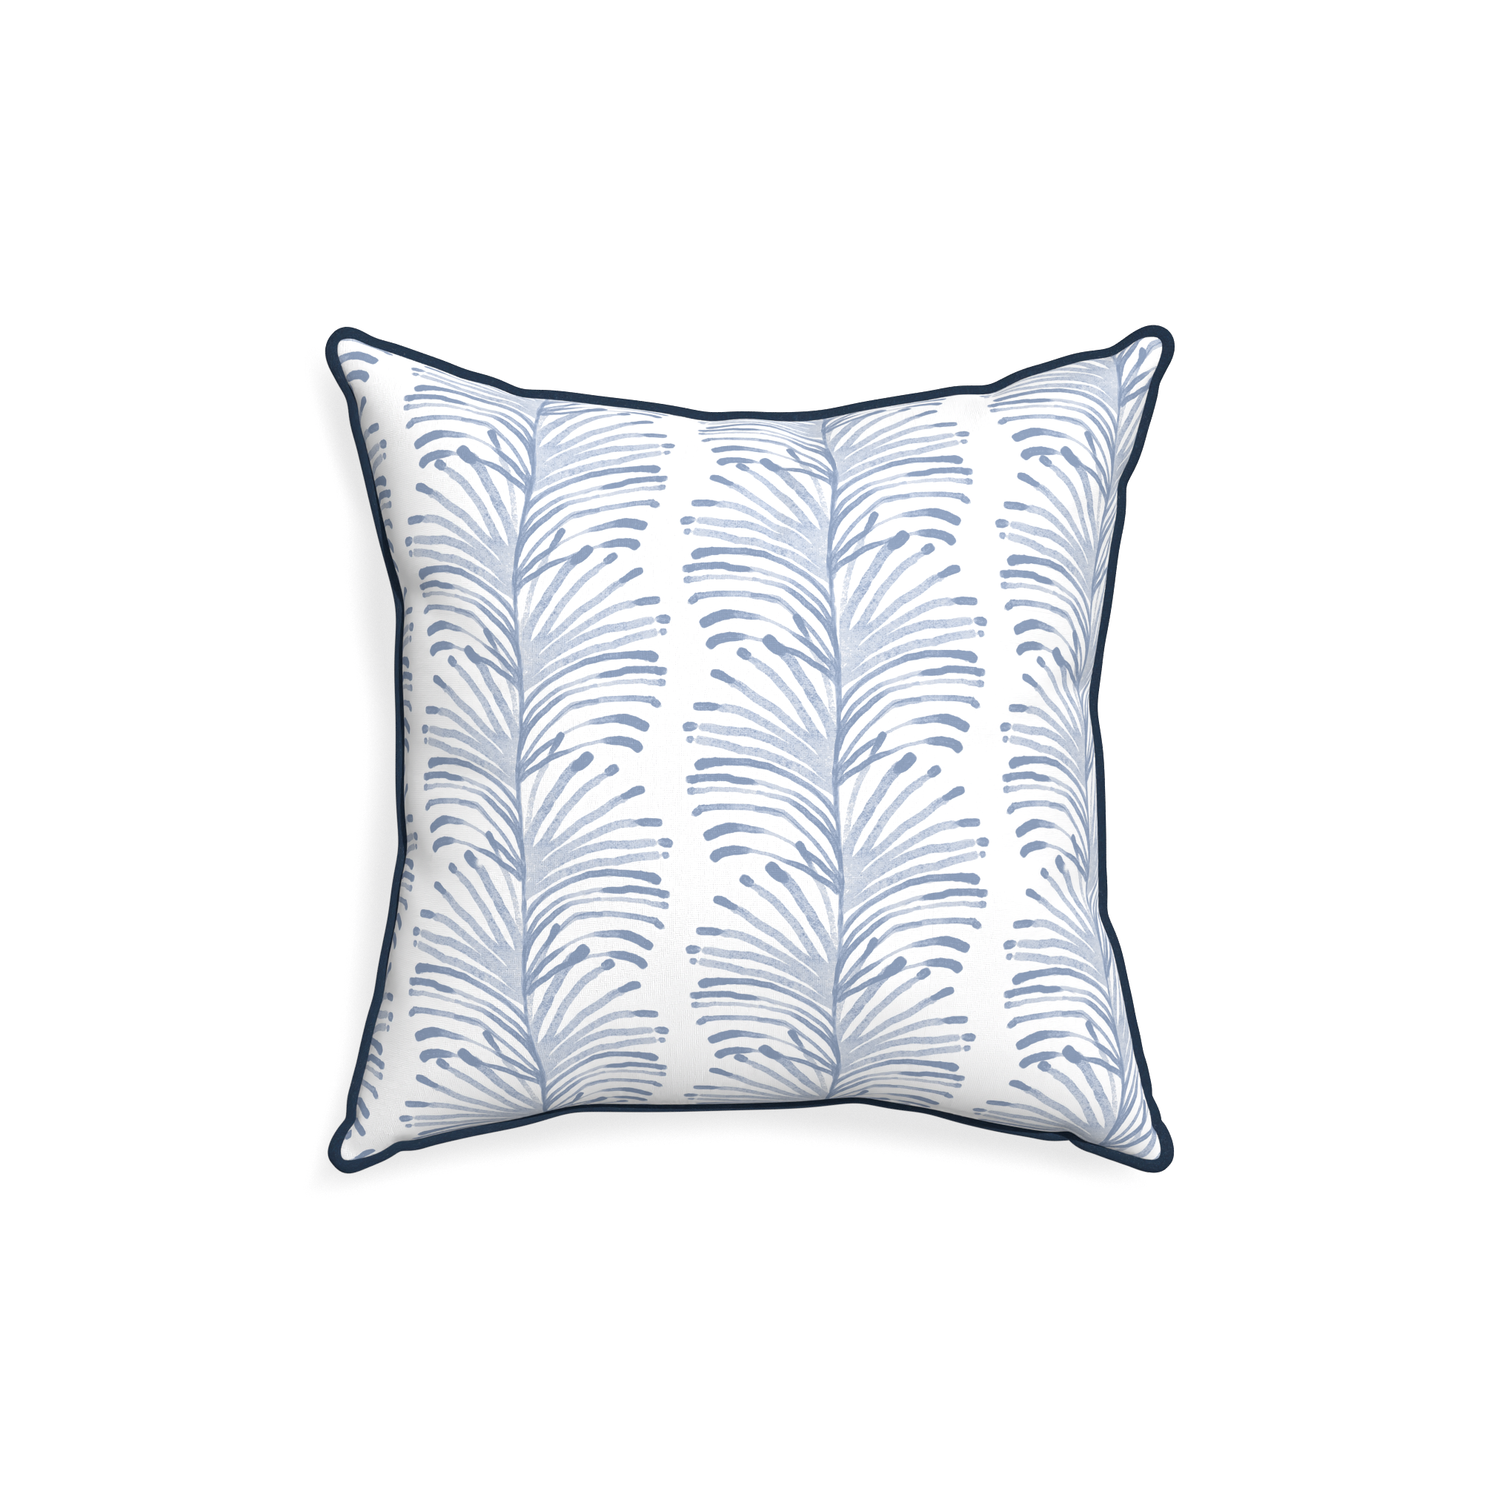 18-square emma sky custom sky blue botanical stripepillow with c piping on white background